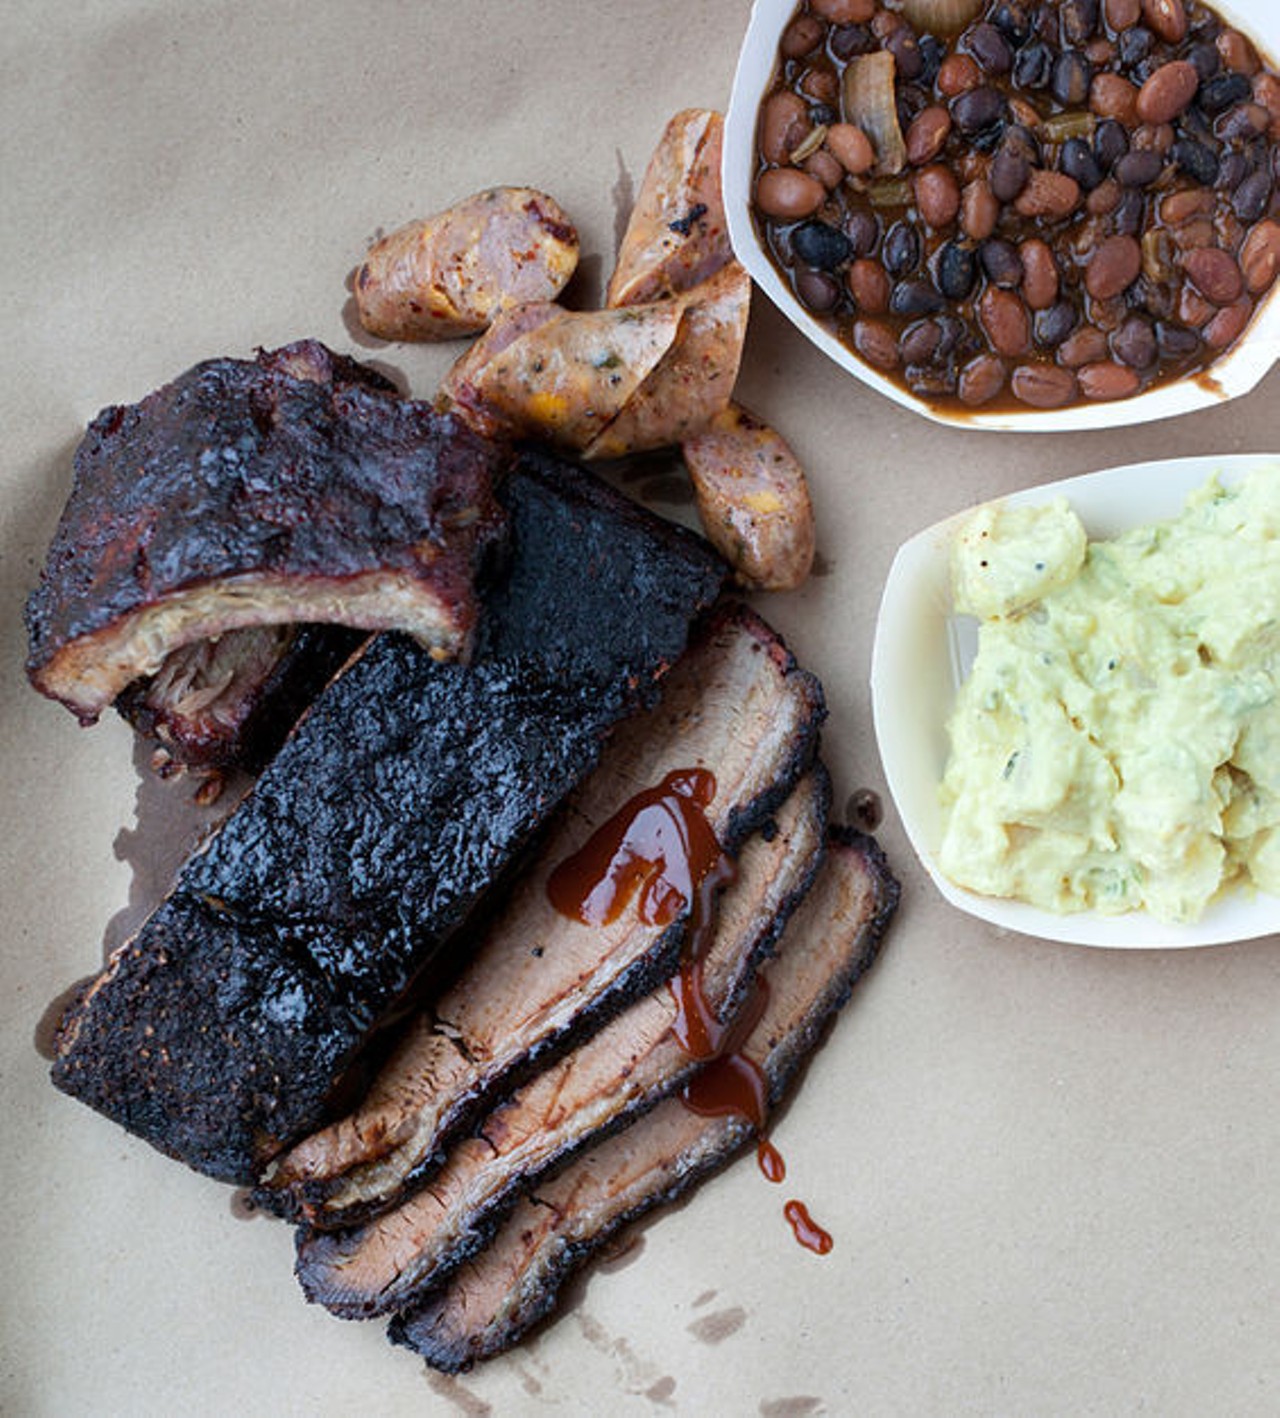 A display of the brisket, baby back ribs, housemade jalapeno sausage, baked beans and potato salad. See more photos: Inside the Sugarfire Smoke House.